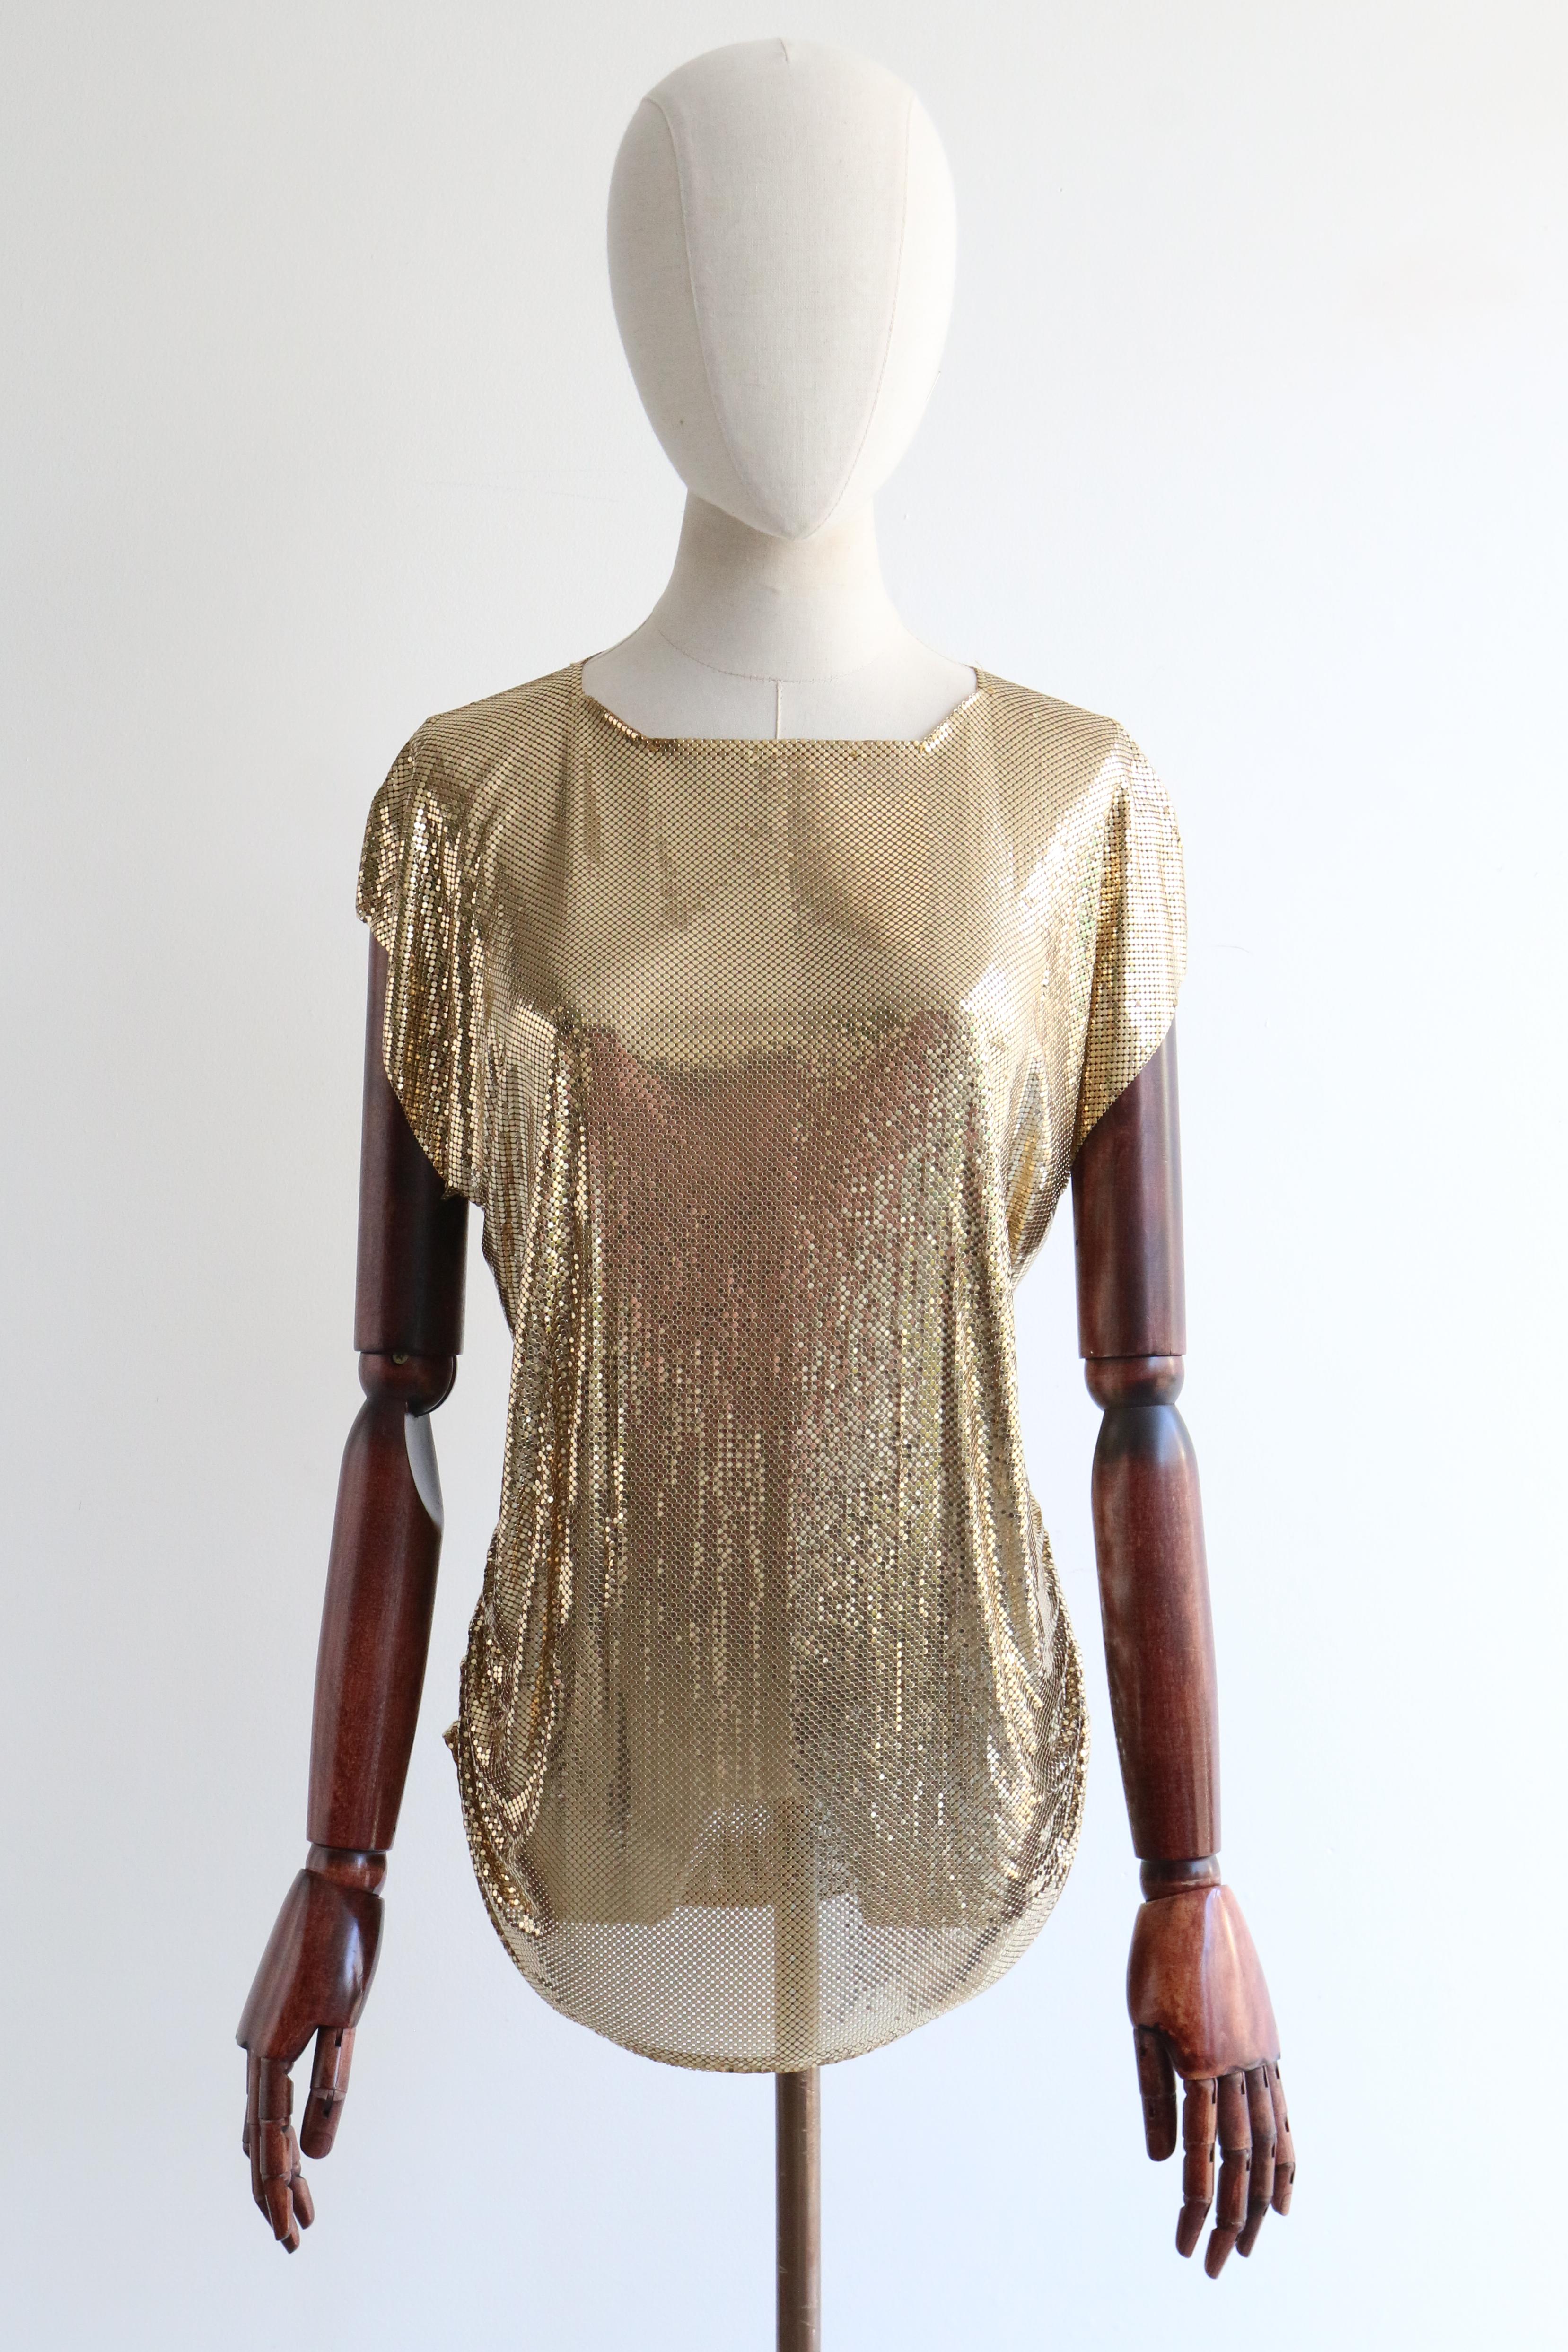 This glamorous 1980's Whiting & Davis gold mesh blouse, is the perfect statement piece of fashion history for your cocktail wardrobe. 

The angular square cut neckline is edged with internal bias binding and is framed by a simple shoulder line. The